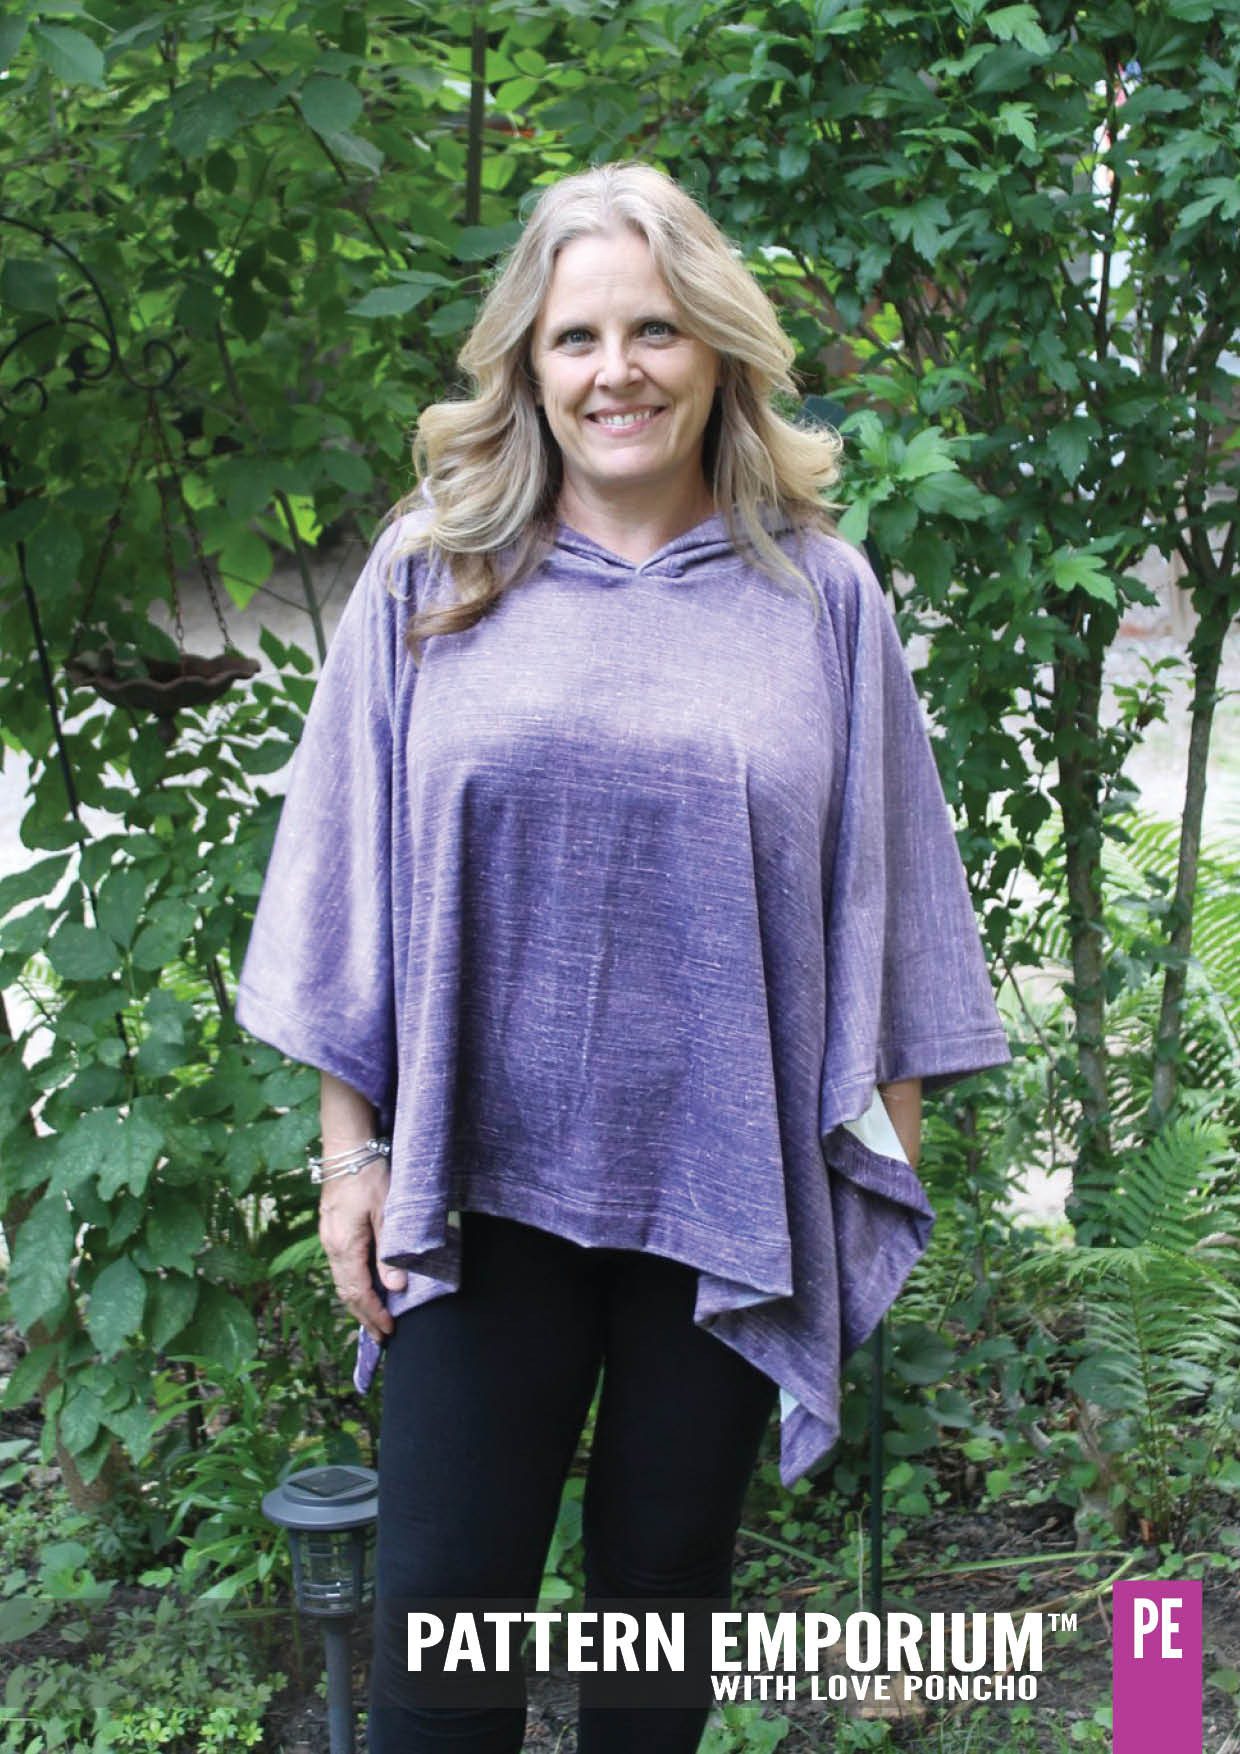 With Love | Poncho Sewing Pattern